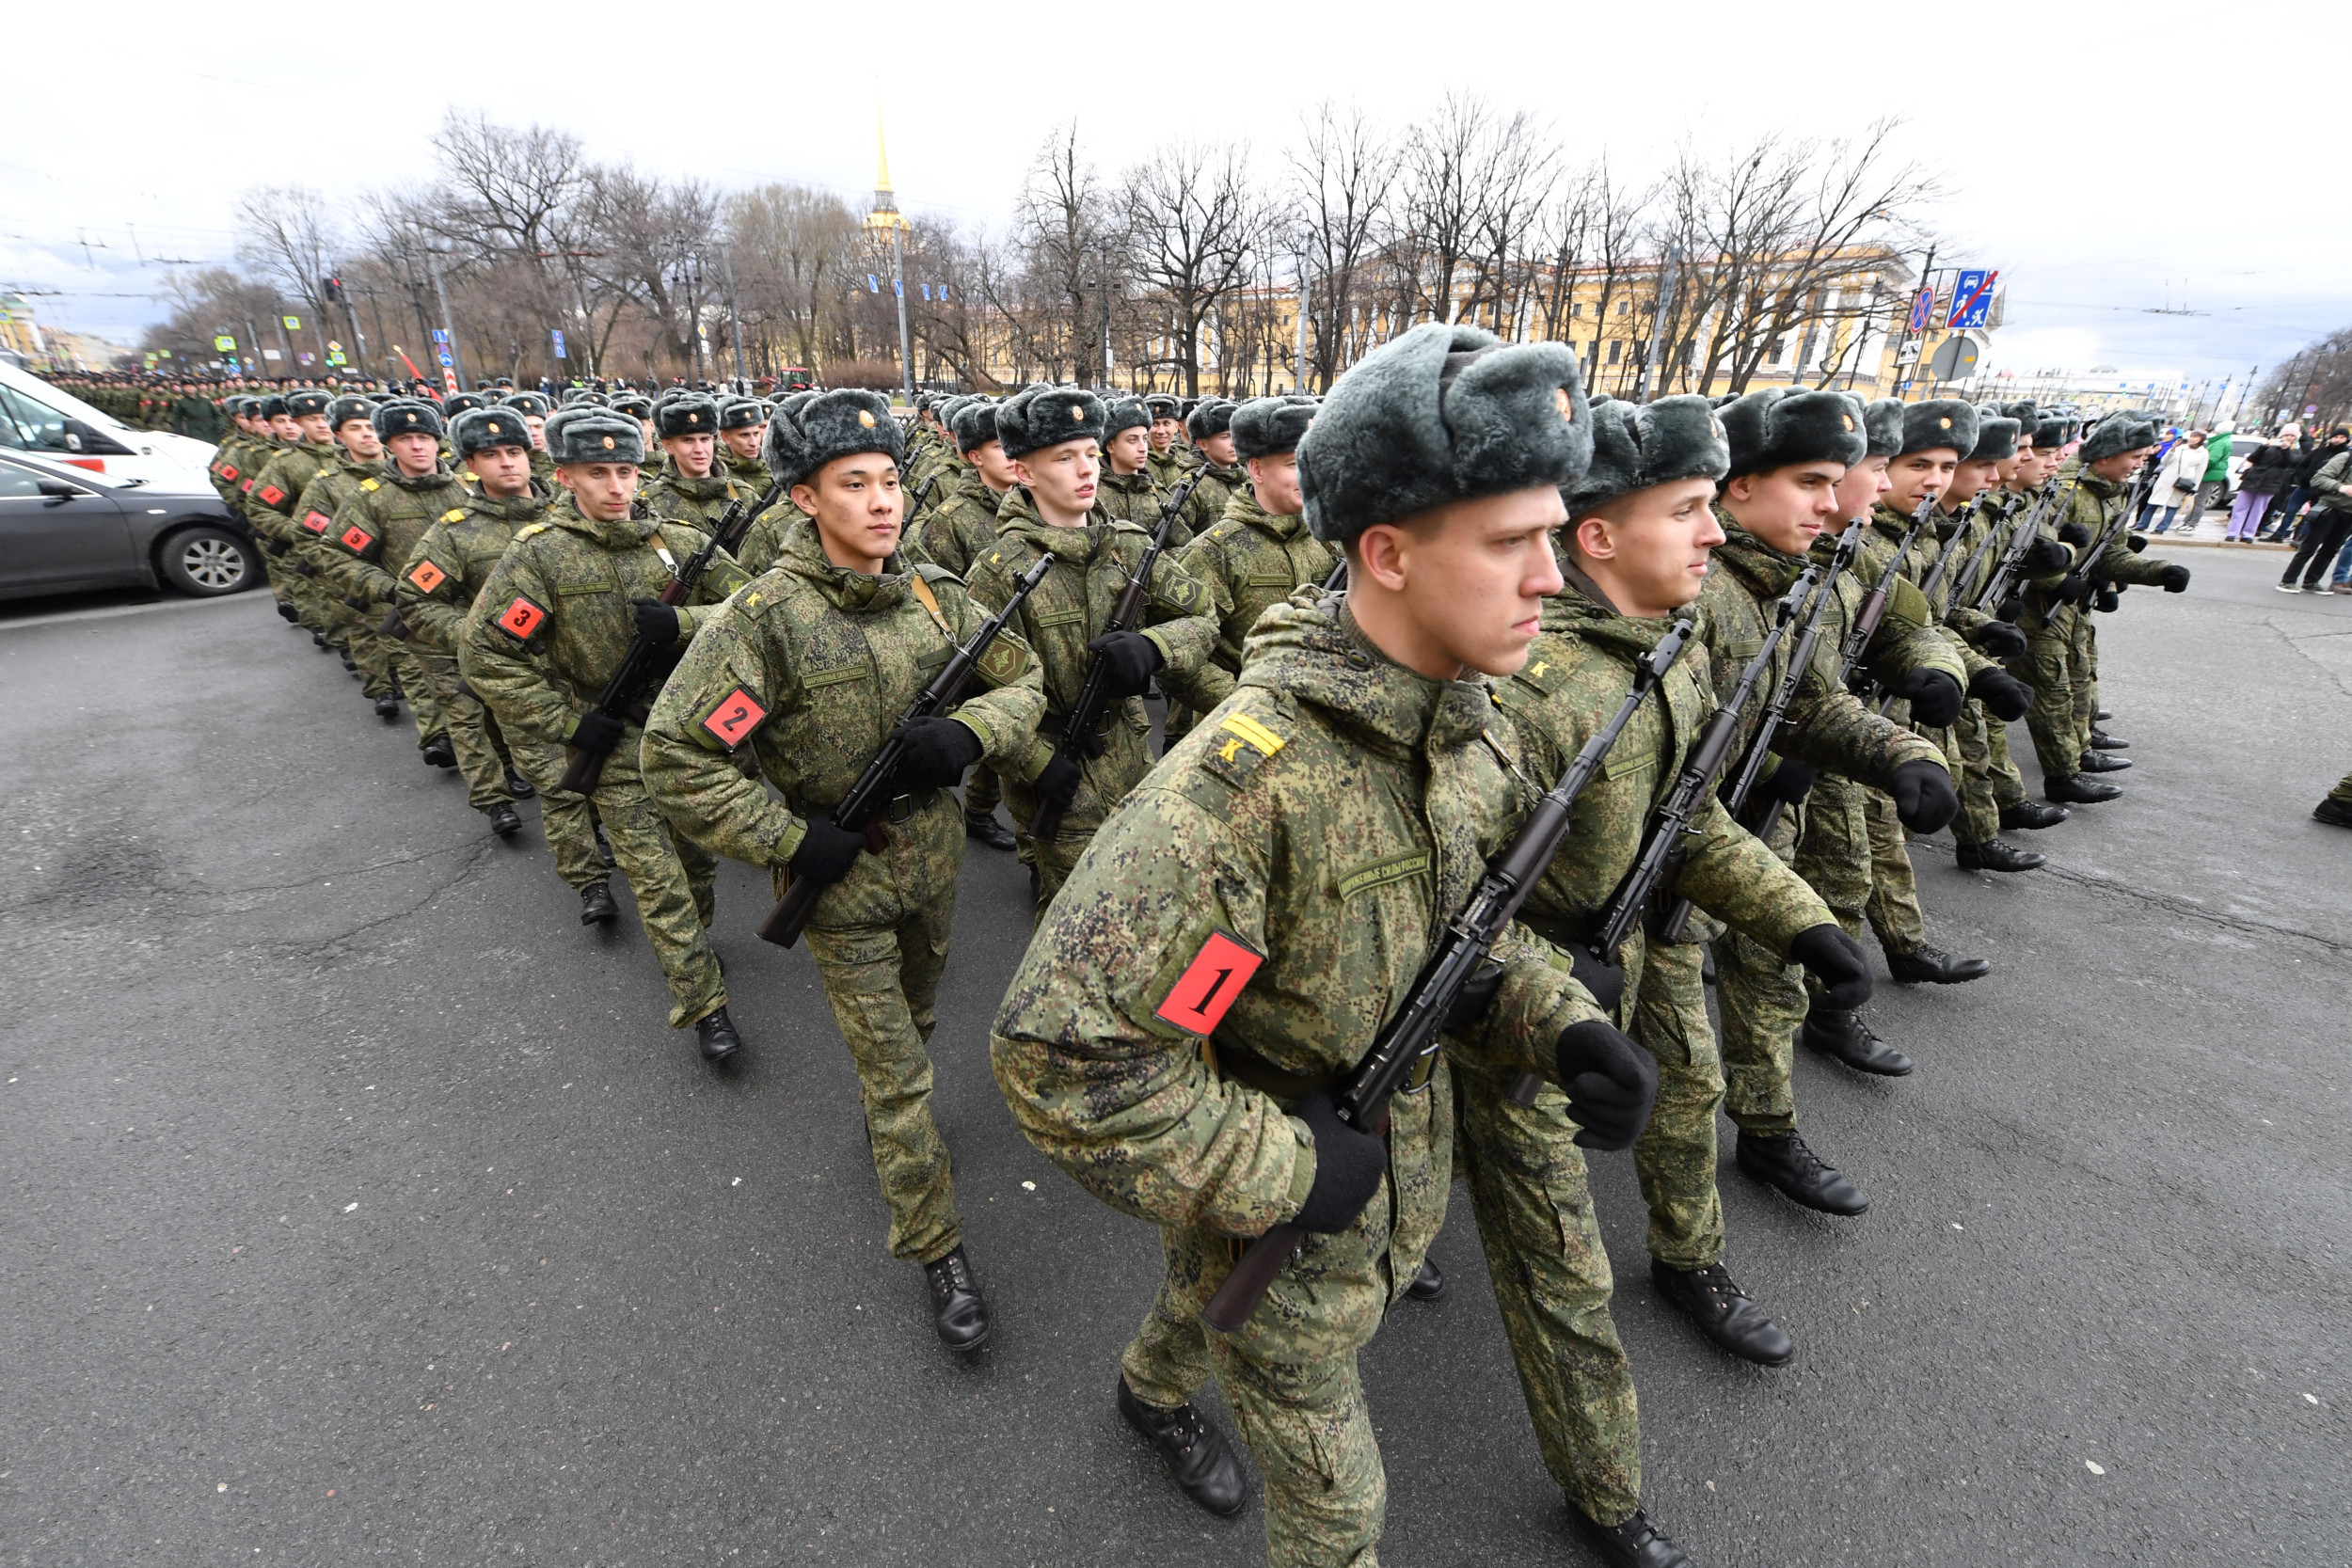 Top Ukraine official warns Russia could capture “Baltics in 7 days”